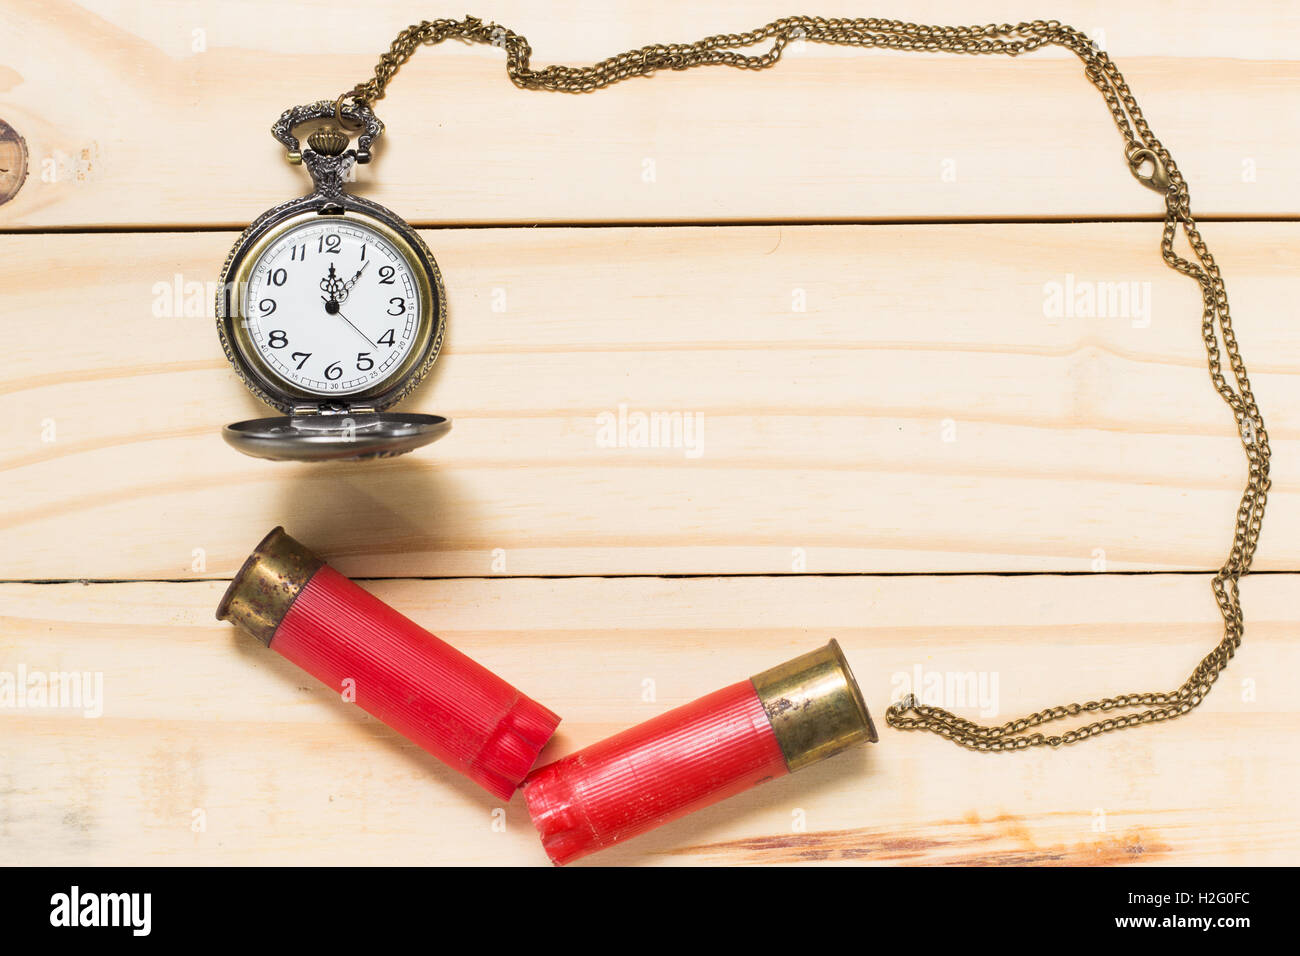 Red shotgun shell, antique clock placed on a wooden floor. Stock Photo